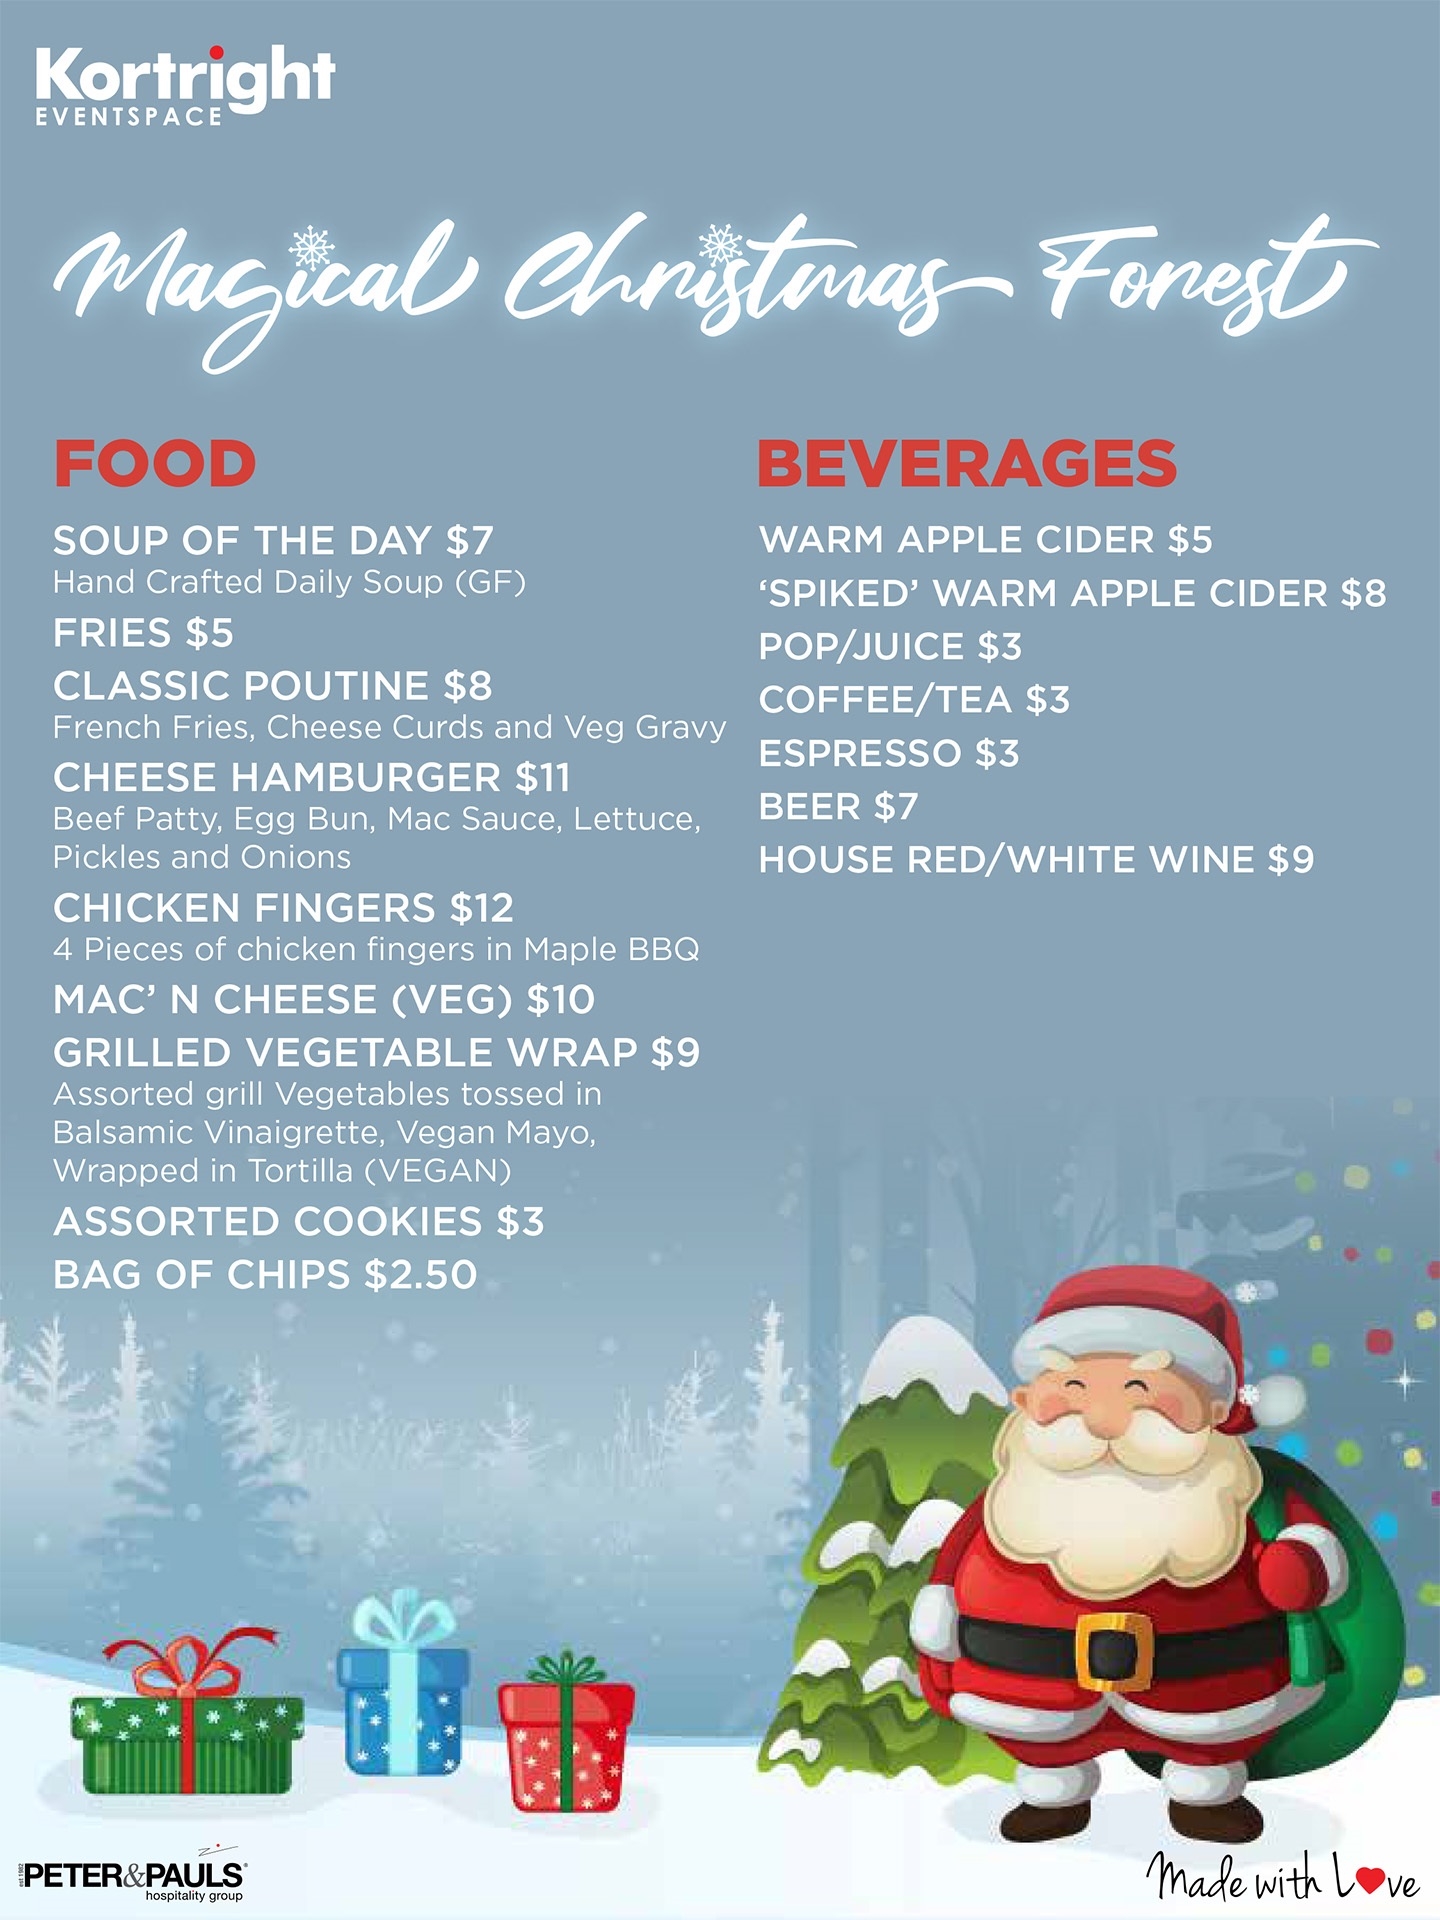 Magical Christmas Forest food and beverage menu